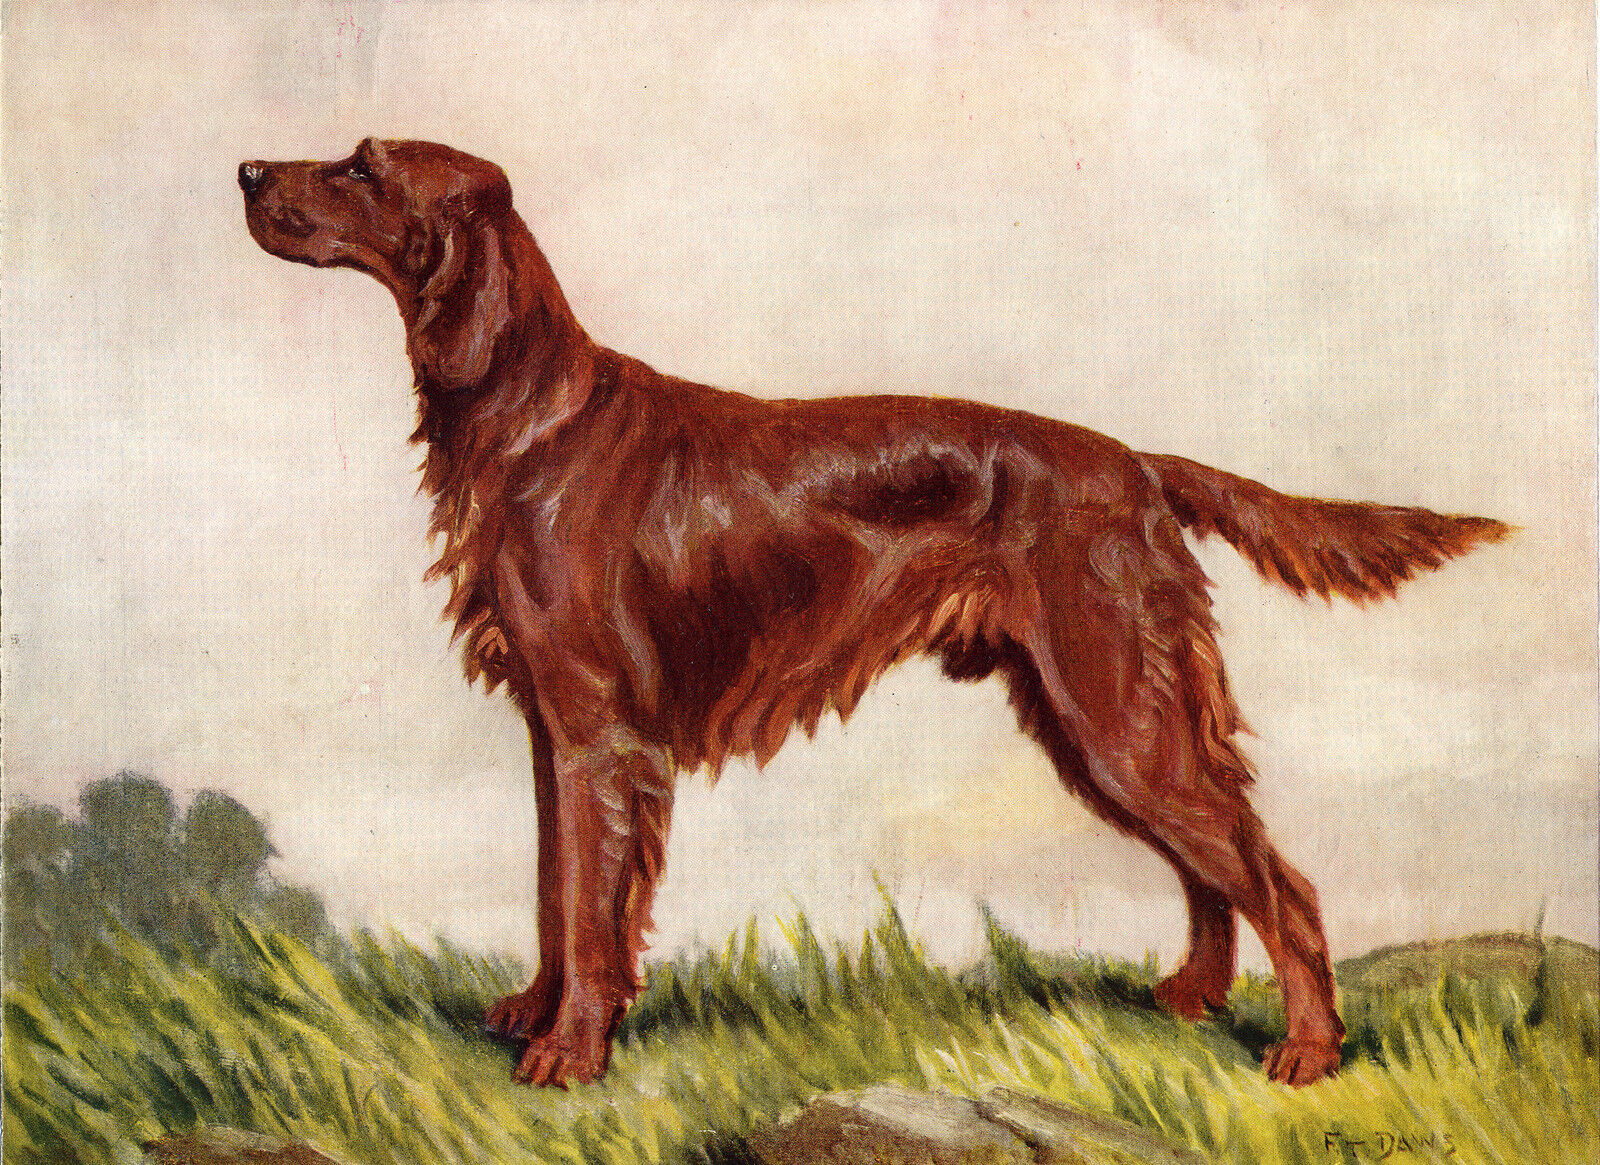 IRISH SETTER OLD DOG COLOUR ART PRINT PAGE FROM 1934 BY F. T. DAWS